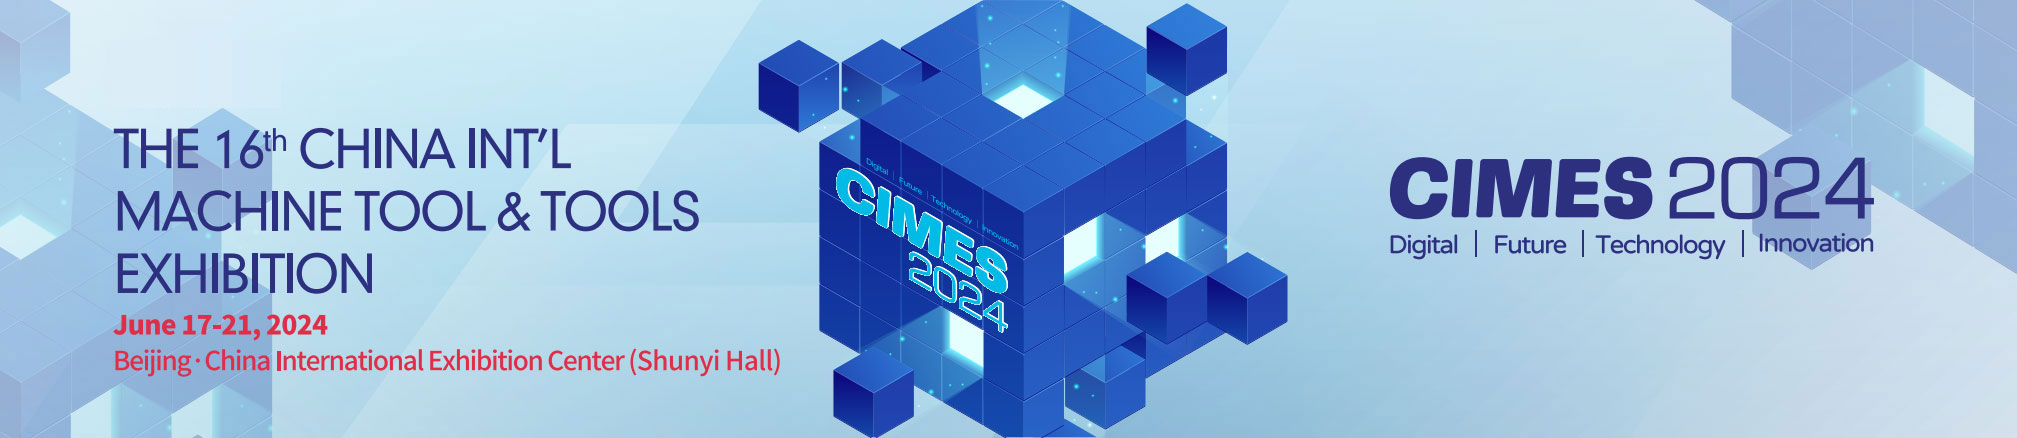 Zhenghao Will Participate in the16th Machine Tool &Tools Exhibition CIMES 2024 Beijing in June